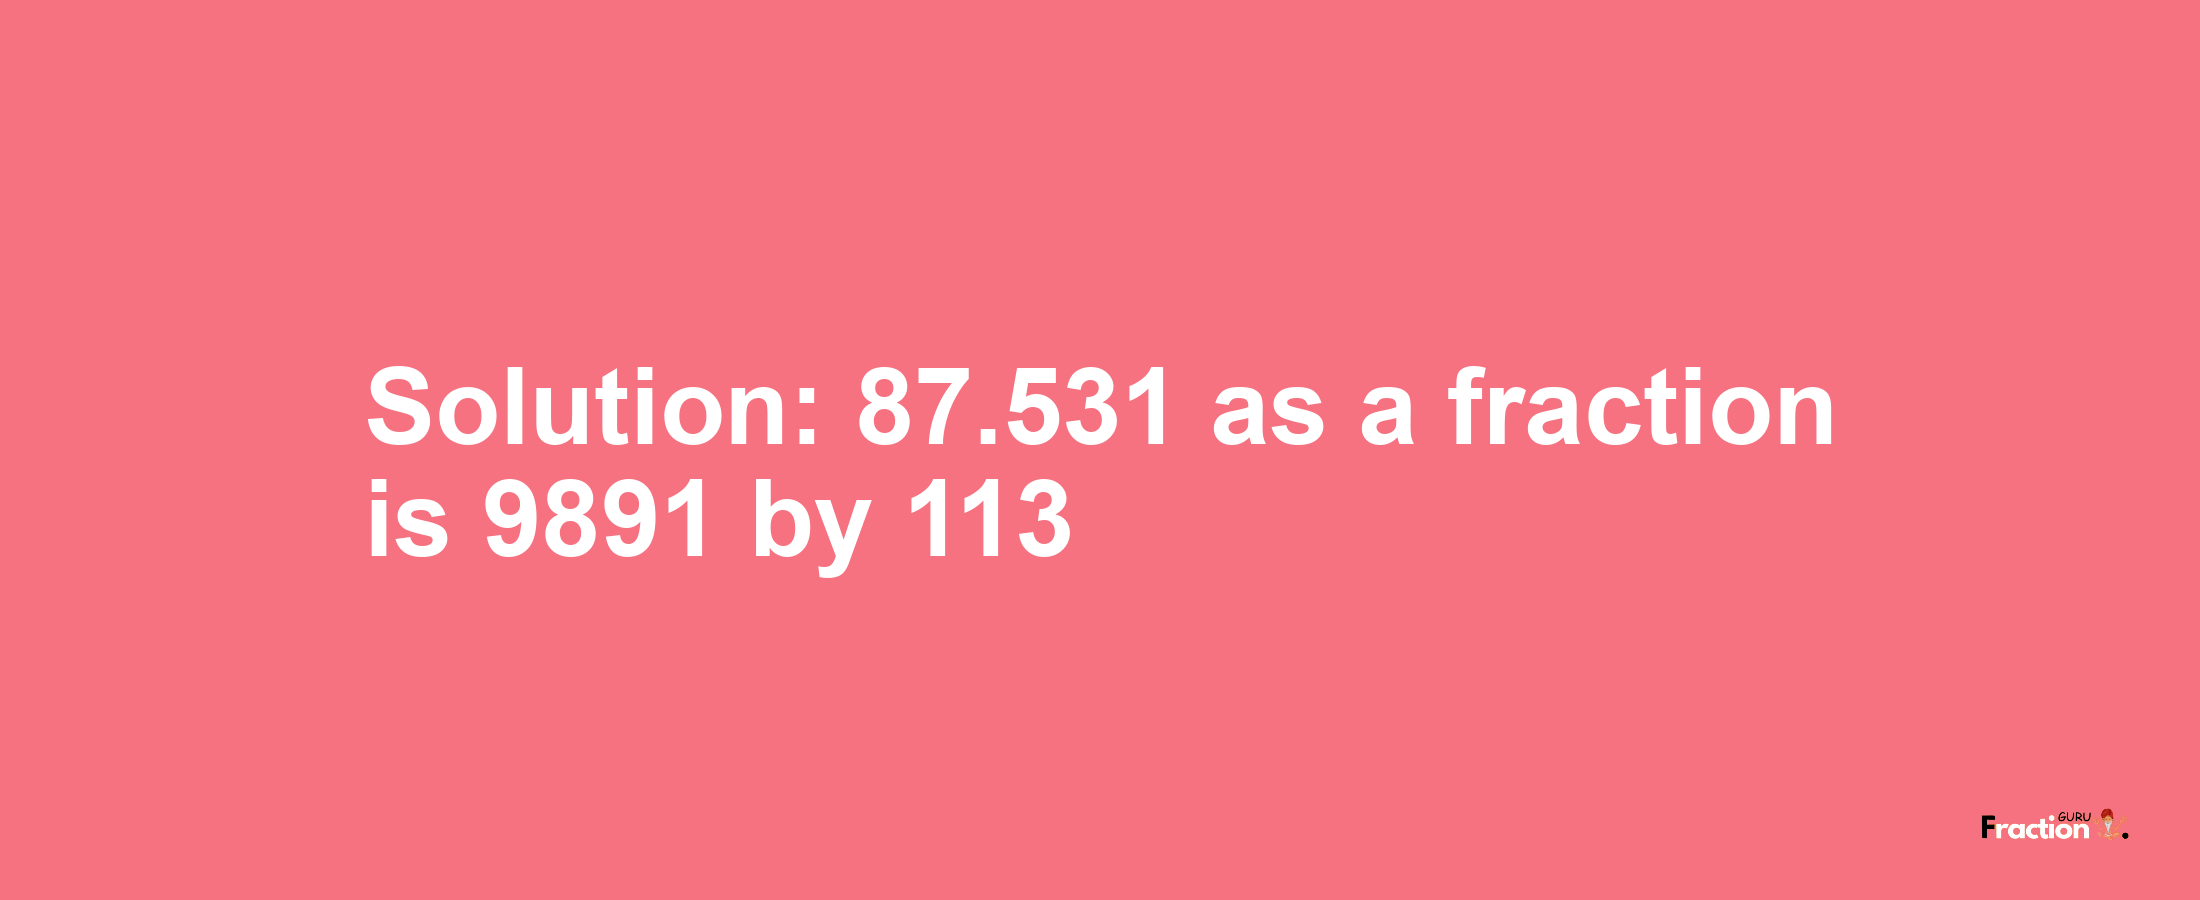 Solution:87.531 as a fraction is 9891/113